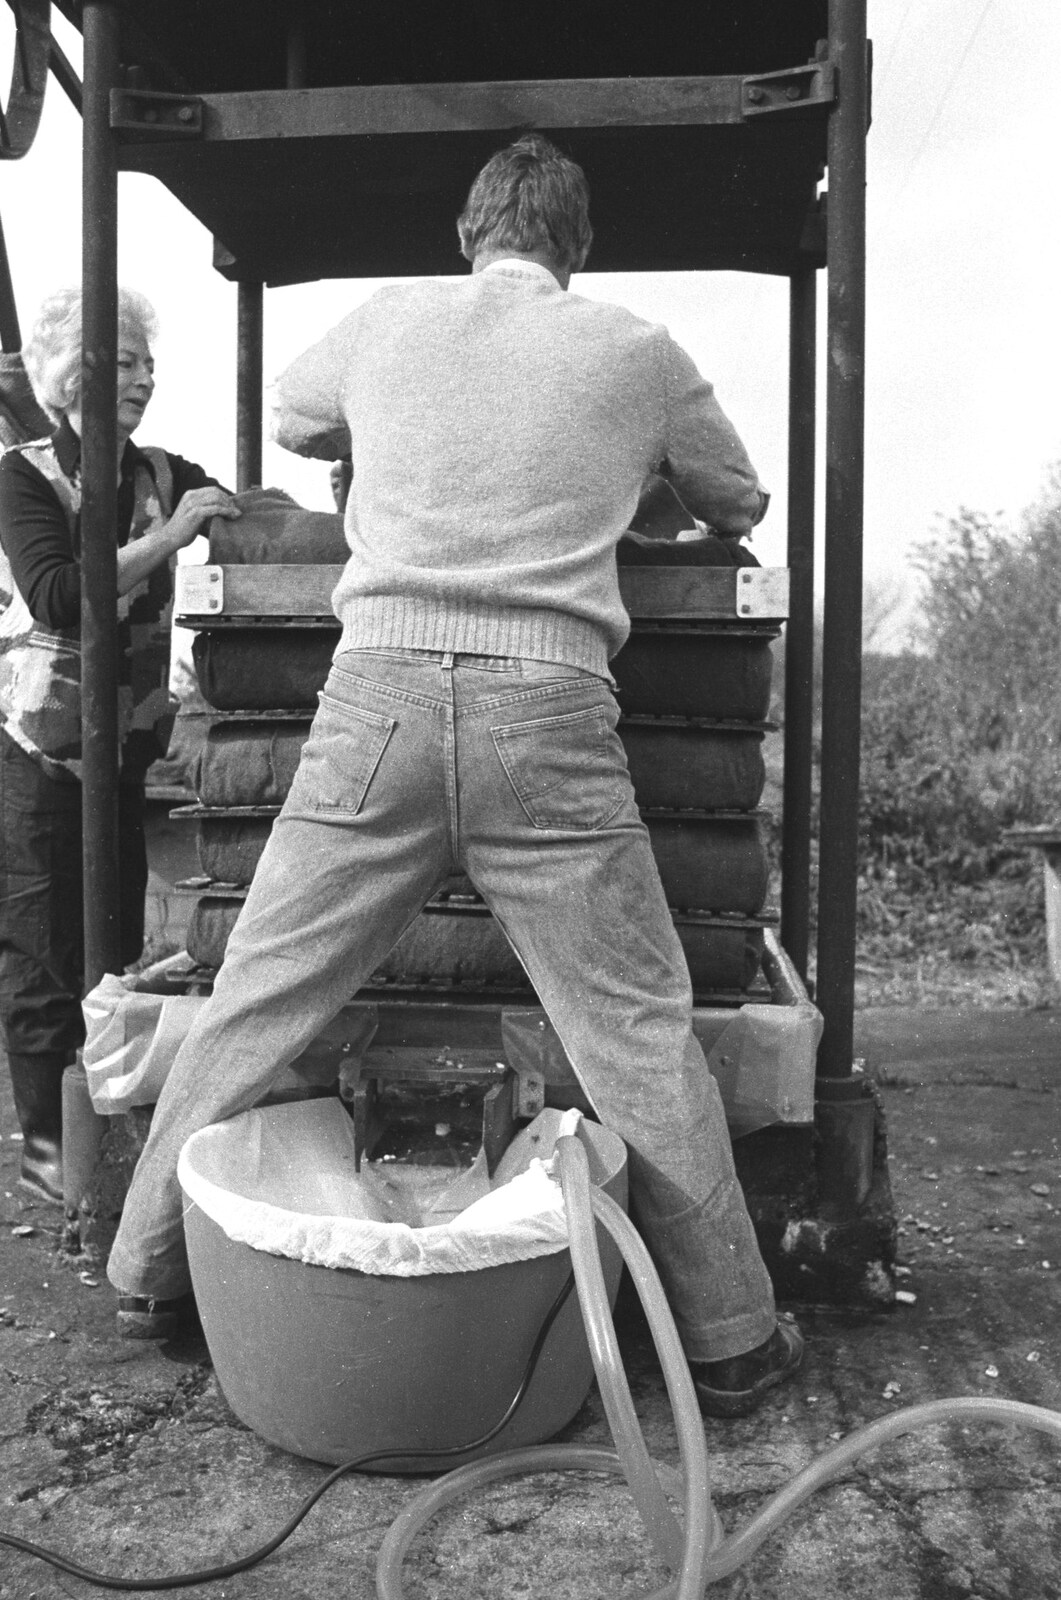 Geoff is astride the juice tank from Cider Making in Black and White, Stuston, Suffolk - 11th October 1992